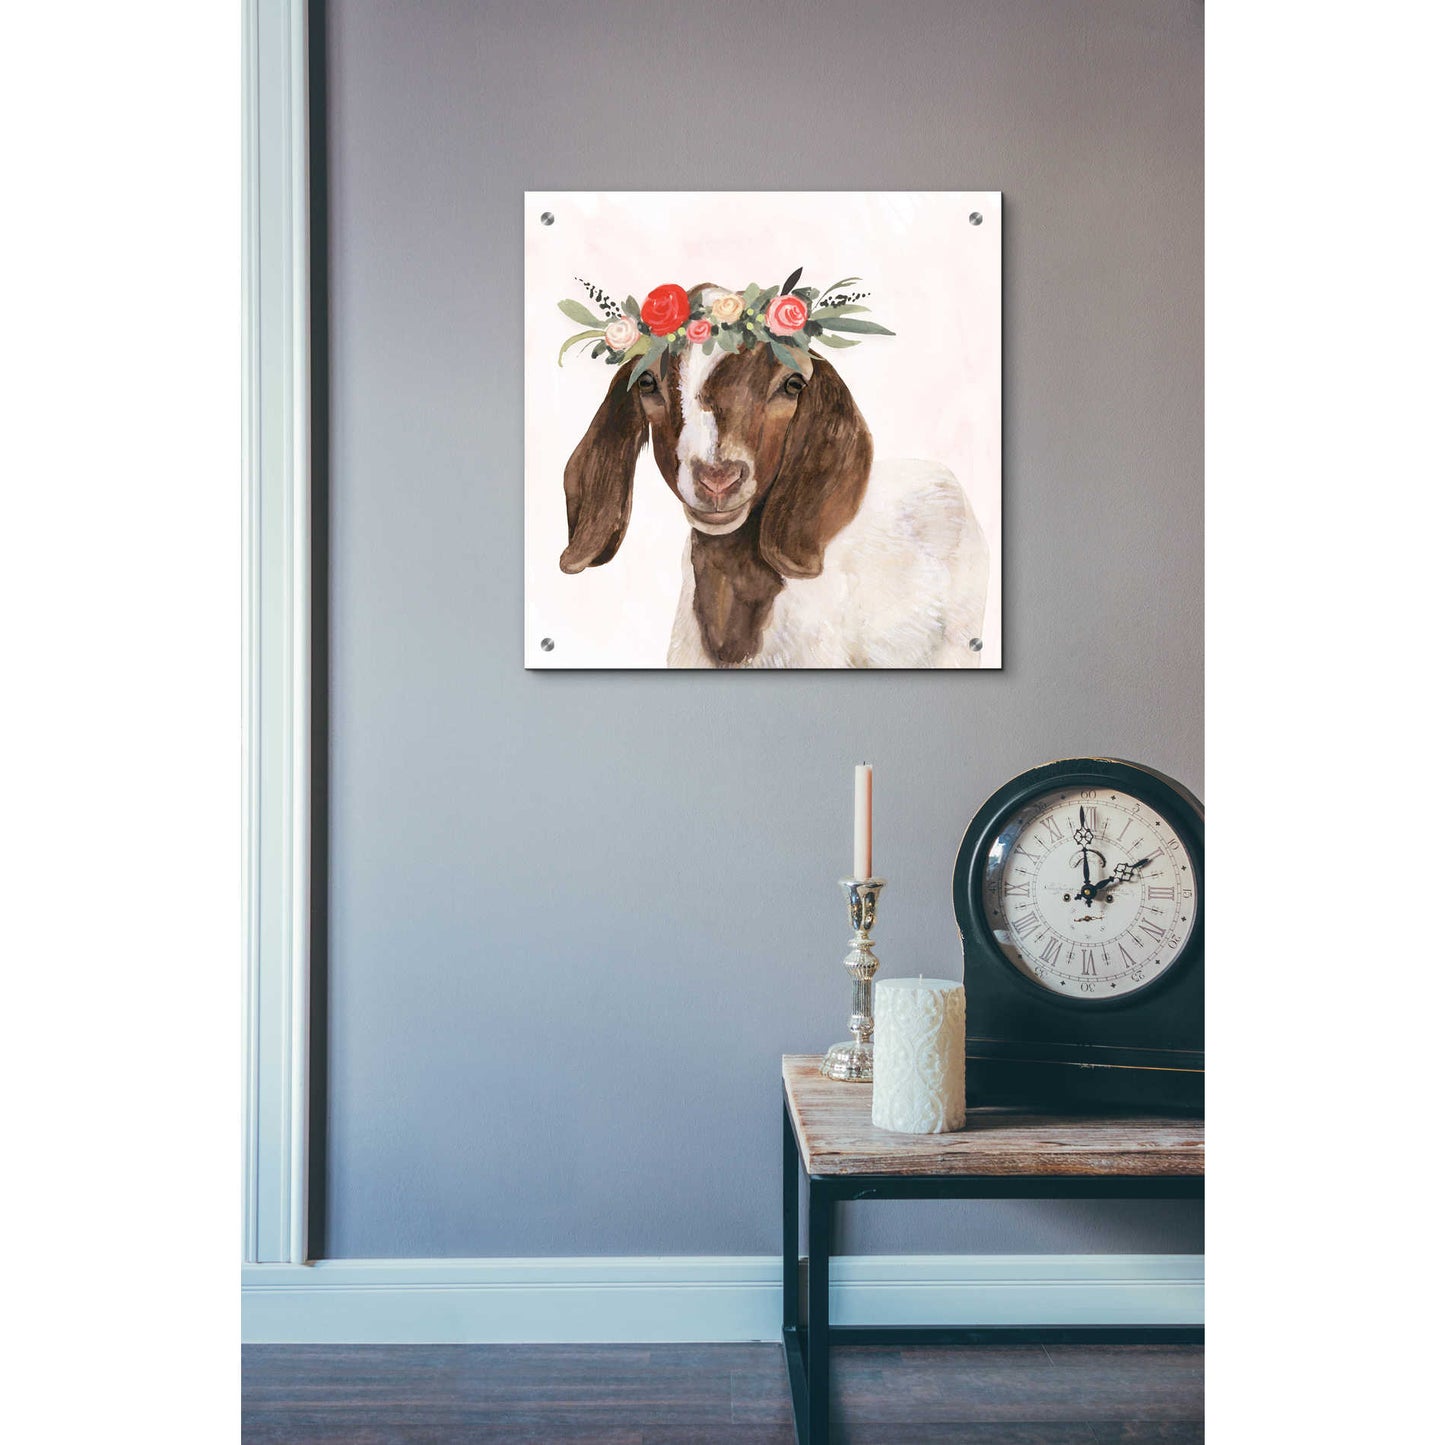 Epic Art 'Garden Goat II' by Victoria Borges, Acrylic Glass Wall Art,24x24